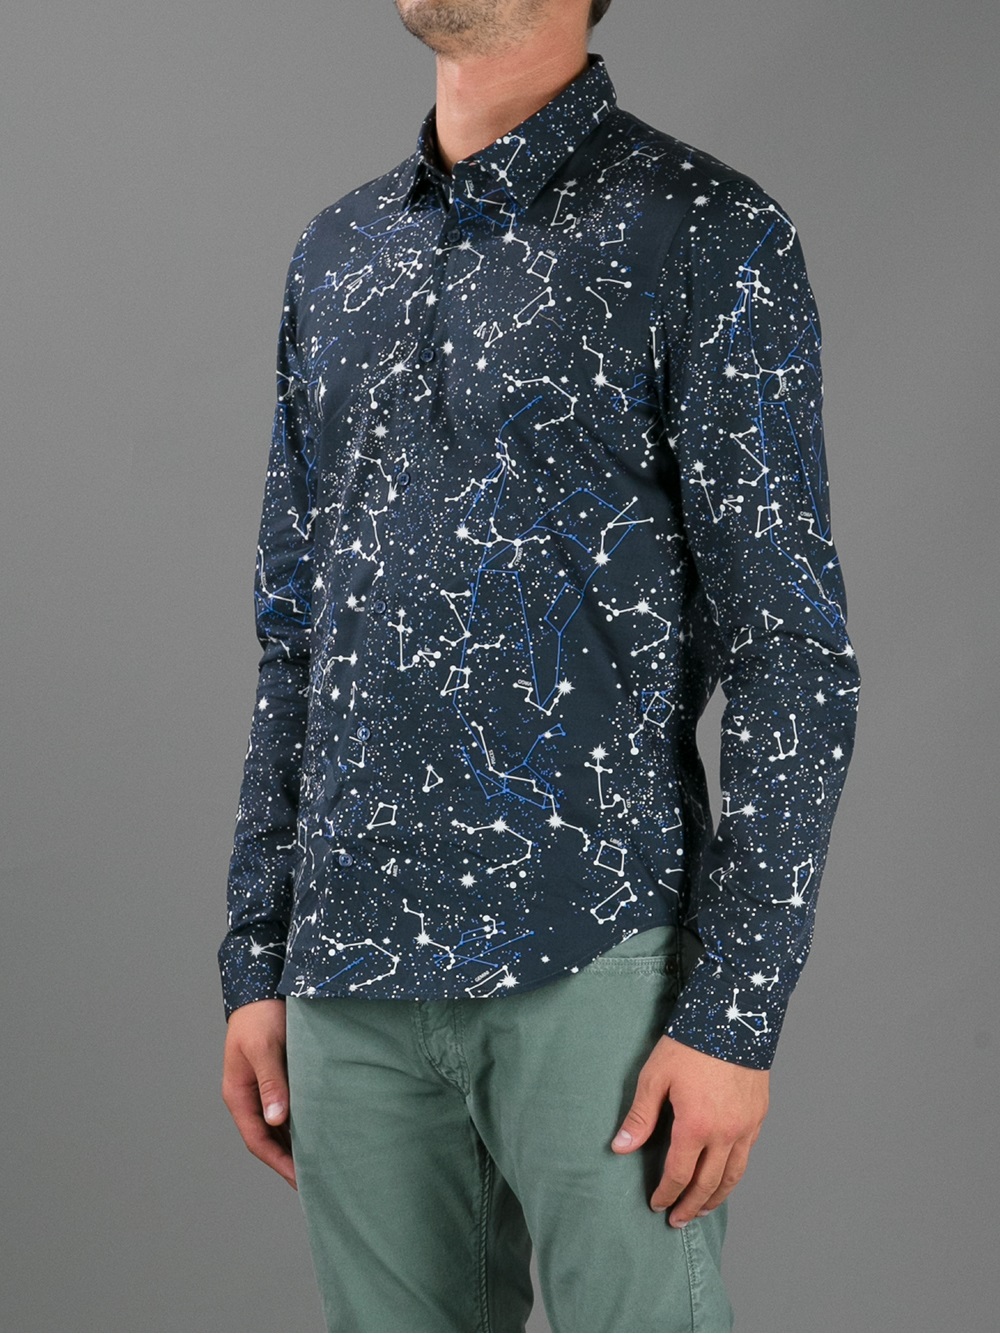 Lyst - KENZO Constellation Printed Shirt in Blue for Men